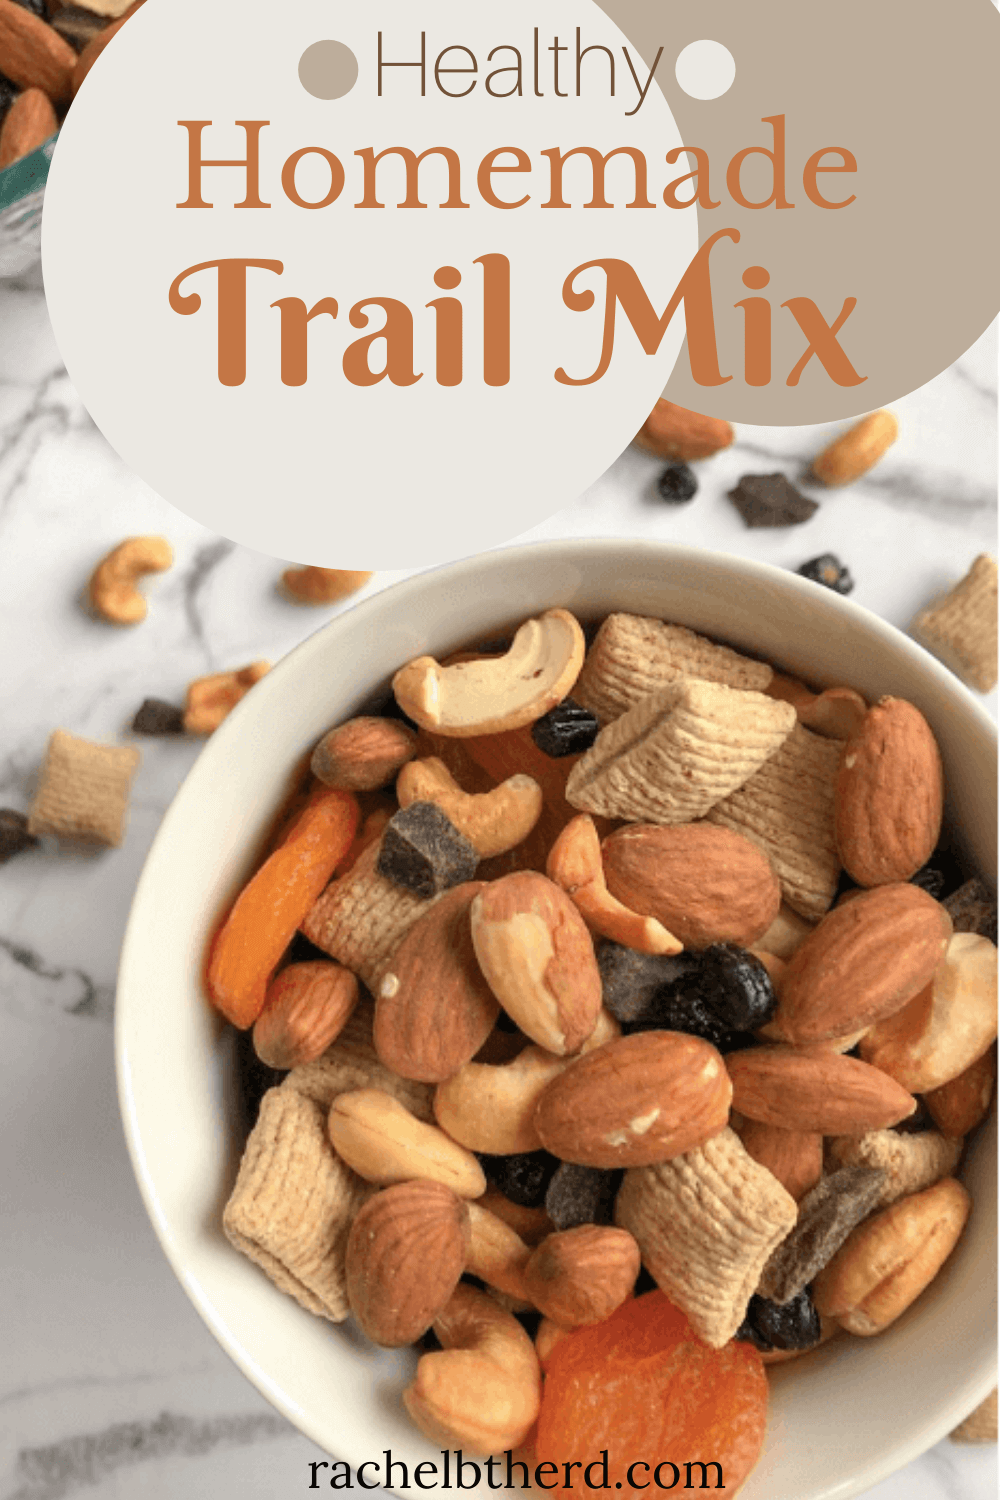 Create Your Own Snack Magic: Homemade Trail Mix Recipe with Aroma